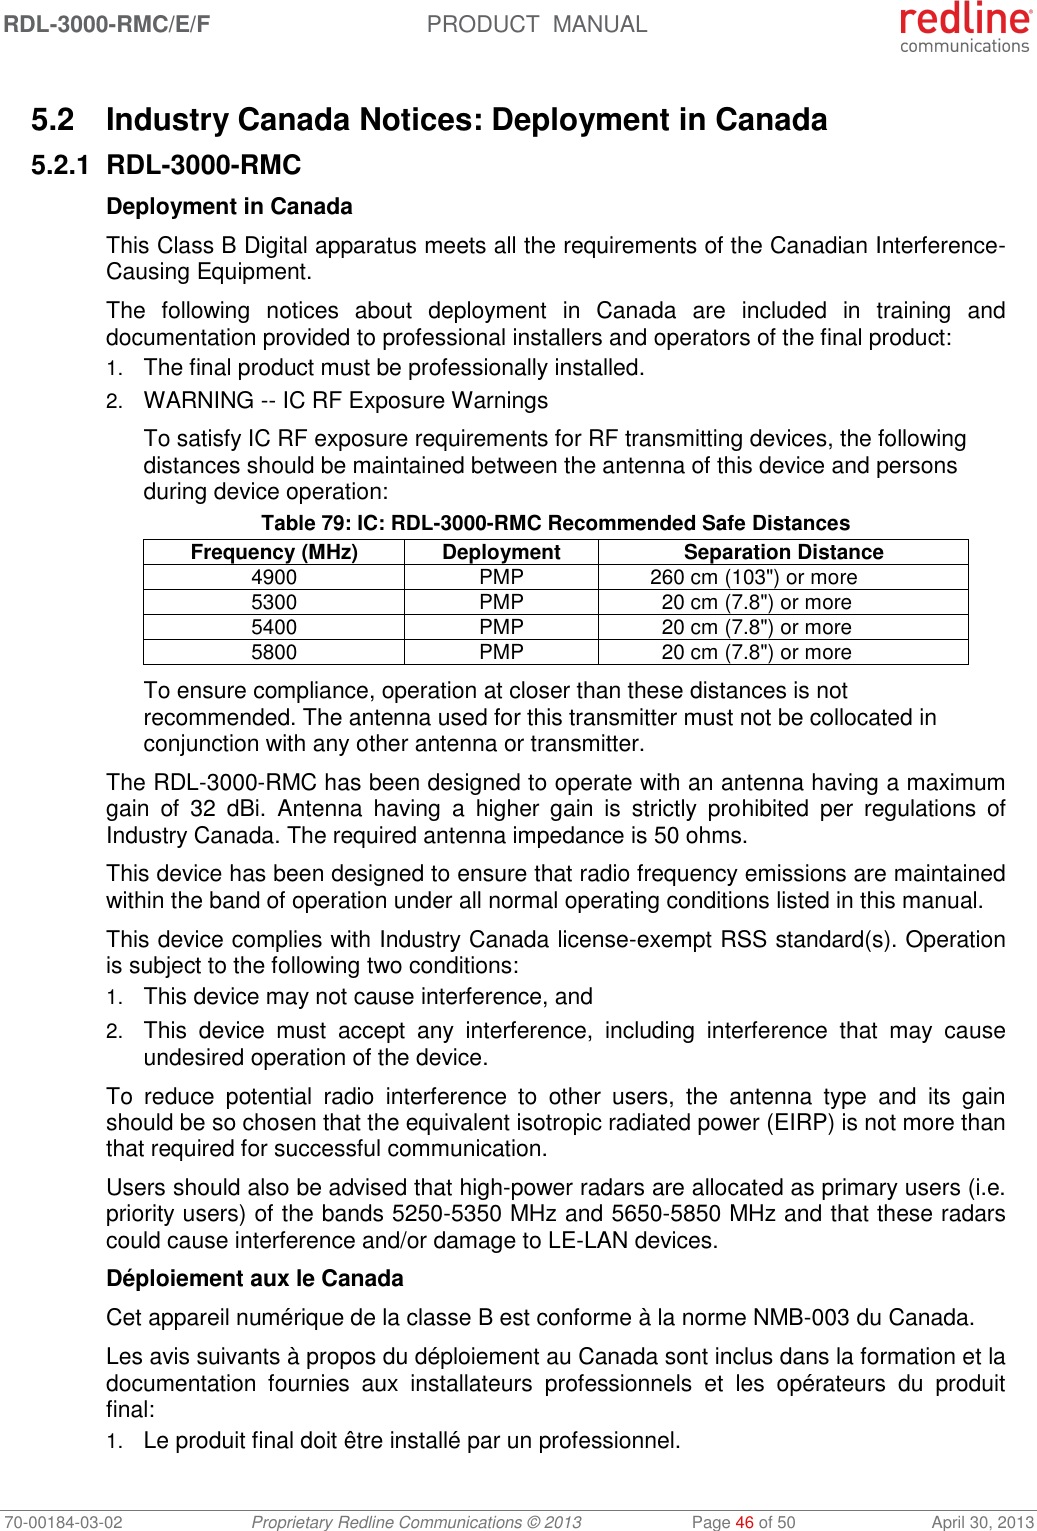 RDL-3000-RMC/E/F  PRODUCT  MANUAL 70-00184-03-02 Proprietary Redline Communications © 2013  Page 46 of 50  April 30, 2013  5.2  Industry Canada Notices: Deployment in Canada 5.2.1 RDL-3000-RMC Deployment in Canada This Class B Digital apparatus meets all the requirements of the Canadian Interference-Causing Equipment. The  following  notices  about  deployment  in  Canada  are  included  in  training  and documentation provided to professional installers and operators of the final product: 1. The final product must be professionally installed. 2. WARNING -- IC RF Exposure Warnings To satisfy IC RF exposure requirements for RF transmitting devices, the following distances should be maintained between the antenna of this device and persons during device operation: Table 79: IC: RDL-3000-RMC Recommended Safe Distances Frequency (MHz) Deployment Separation Distance 4900 PMP 260 cm (103&quot;) or more 5300 PMP 20 cm (7.8&quot;) or more 5400 PMP 20 cm (7.8&quot;) or more 5800 PMP 20 cm (7.8&quot;) or more To ensure compliance, operation at closer than these distances is not recommended. The antenna used for this transmitter must not be collocated in conjunction with any other antenna or transmitter. The RDL-3000-RMC has been designed to operate with an antenna having a maximum gain  of  32  dBi.  Antenna  having  a  higher  gain  is  strictly  prohibited  per  regulations  of Industry Canada. The required antenna impedance is 50 ohms. This device has been designed to ensure that radio frequency emissions are maintained within the band of operation under all normal operating conditions listed in this manual. This device complies with Industry Canada license-exempt RSS standard(s). Operation is subject to the following two conditions: 1. This device may not cause interference, and  2. This  device  must  accept  any  interference,  including  interference  that  may  cause undesired operation of the device. To  reduce  potential  radio  interference  to  other  users,  the  antenna  type  and  its  gain should be so chosen that the equivalent isotropic radiated power (EIRP) is not more than that required for successful communication. Users should also be advised that high-power radars are allocated as primary users (i.e. priority users) of the bands 5250-5350 MHz and 5650-5850 MHz and that these radars could cause interference and/or damage to LE-LAN devices. Déploiement aux le Canada Cet appareil numérique de la classe B est conforme à la norme NMB-003 du Canada. Les avis suivants à propos du déploiement au Canada sont inclus dans la formation et la documentation  fournies  aux  installateurs  professionnels  et  les  opérateurs  du  produit final: 1. Le produit final doit être installé par un professionnel. 